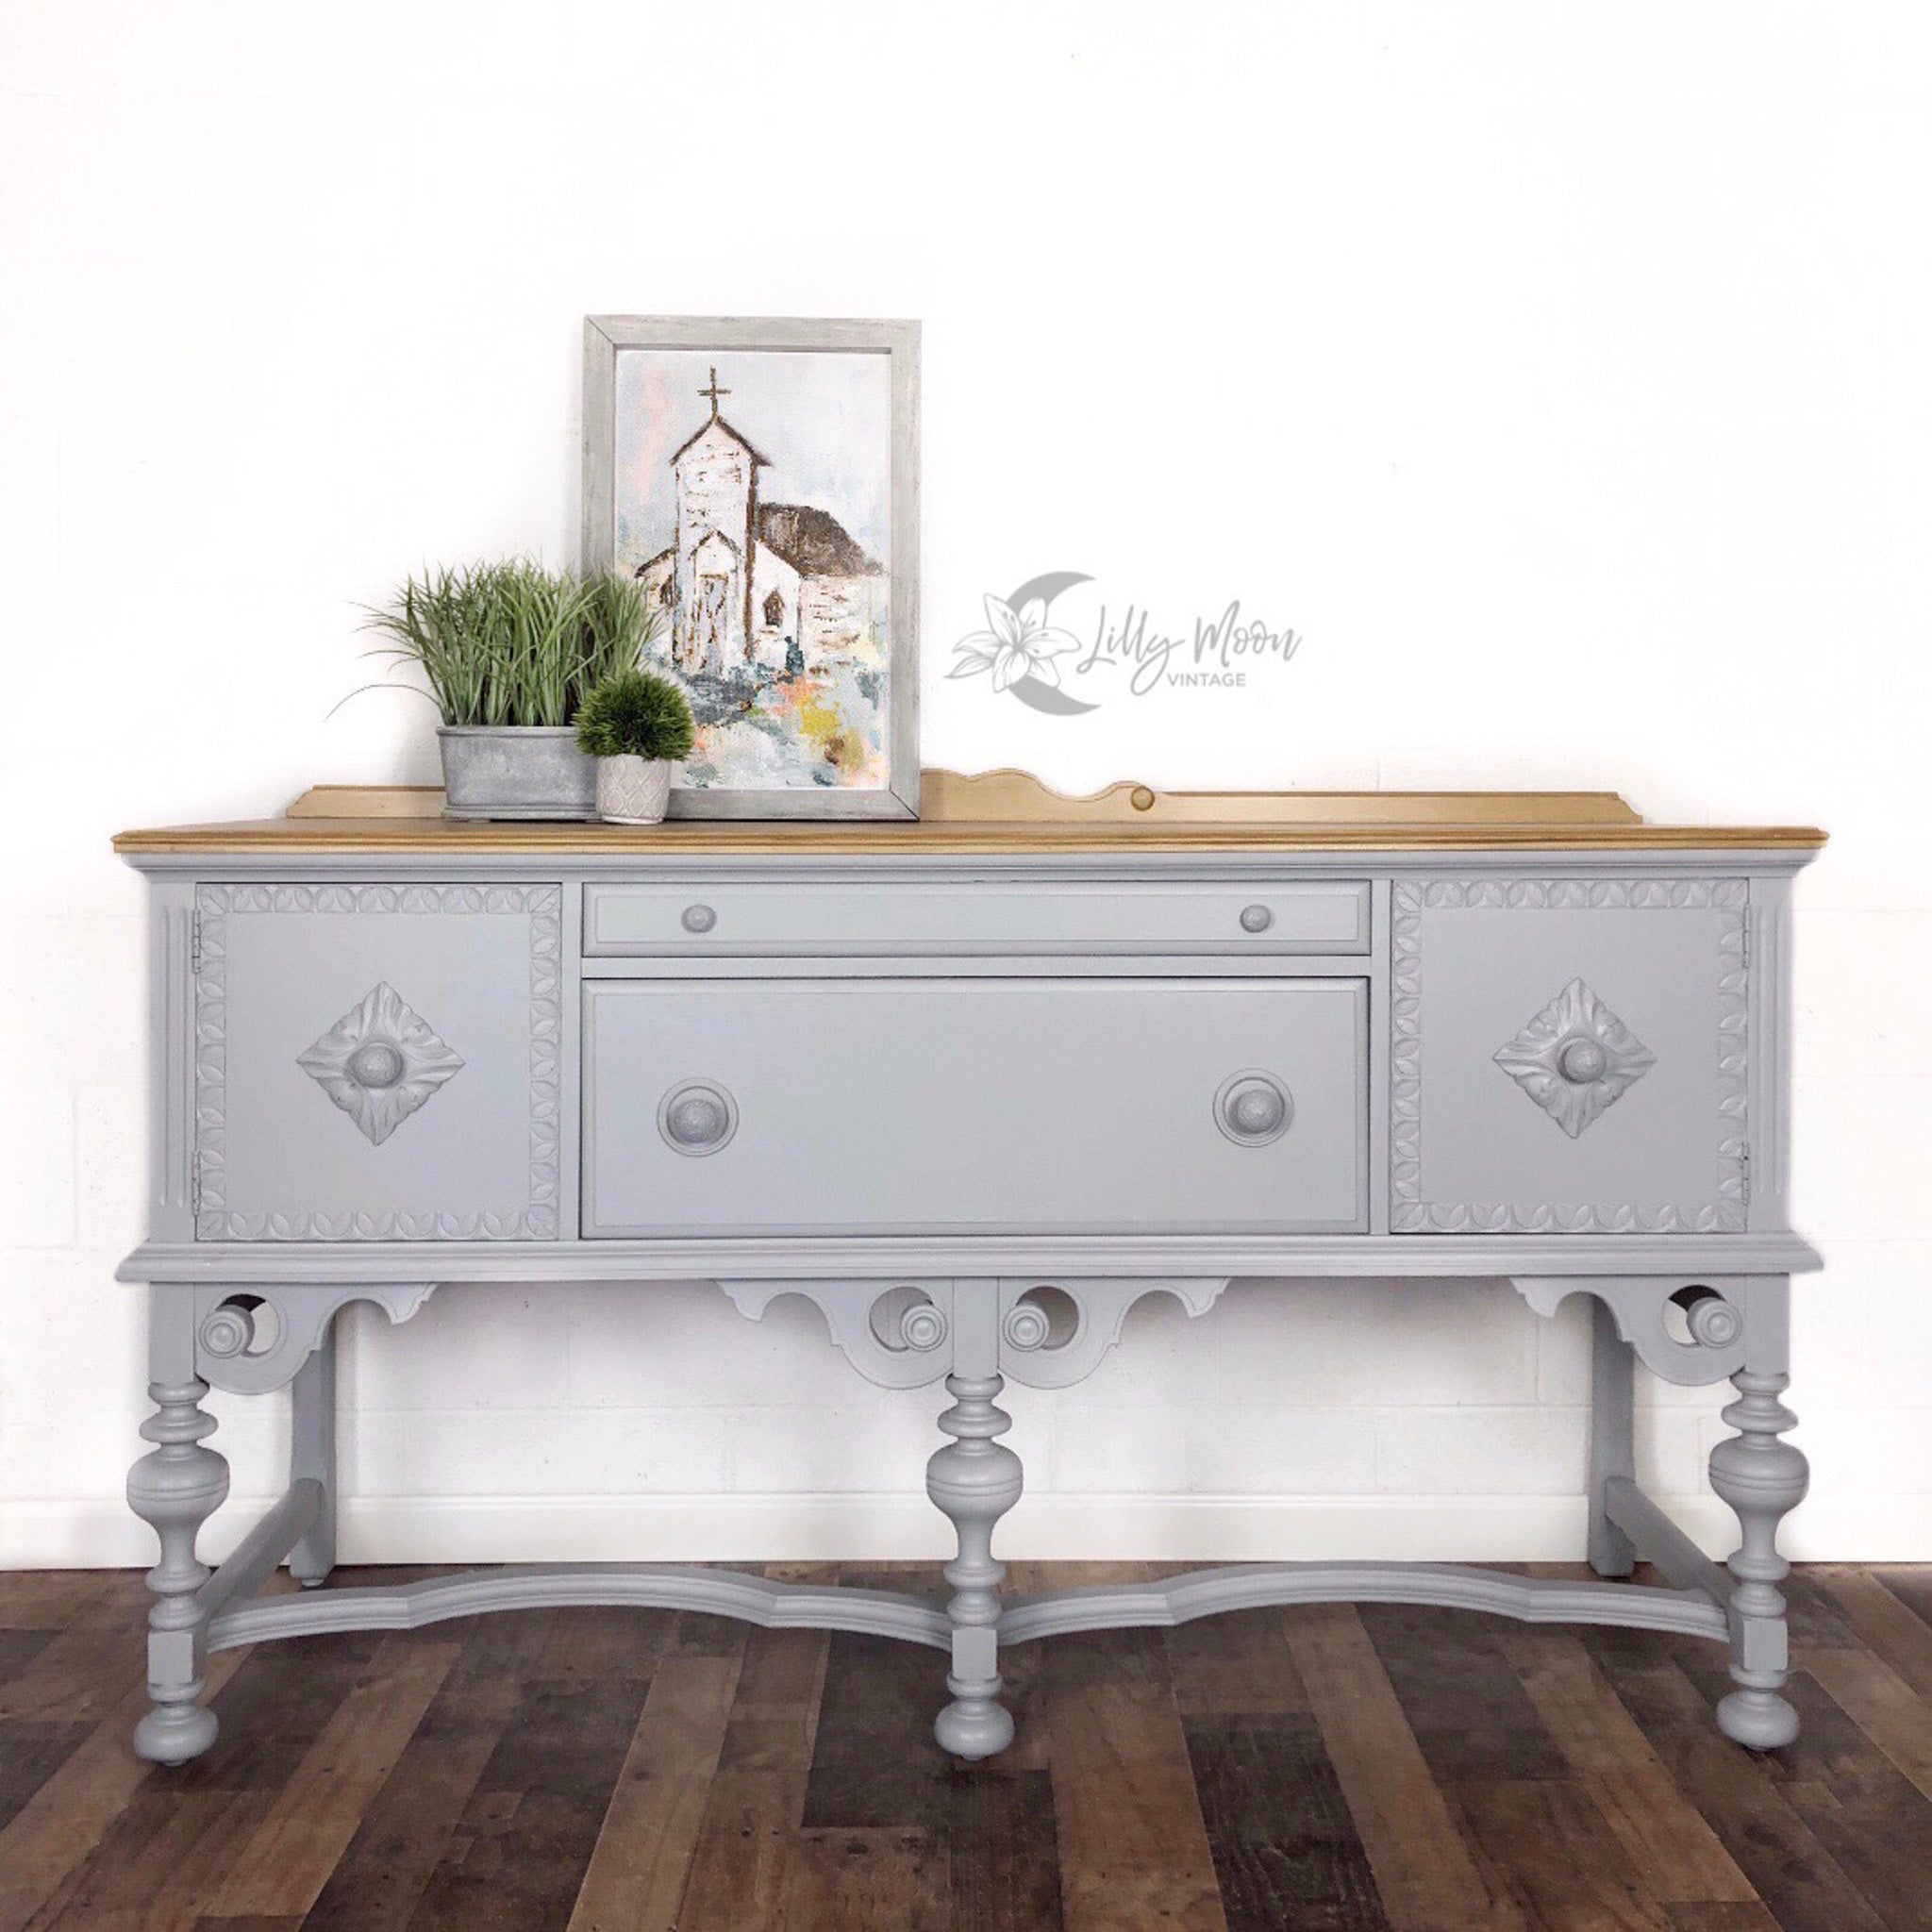 A vintage console table with storage refurbished by Lilly Moon Vintage is painted in Dixie Belle's Manatee Gray chalk mineral paint and has a natural wood top on it.